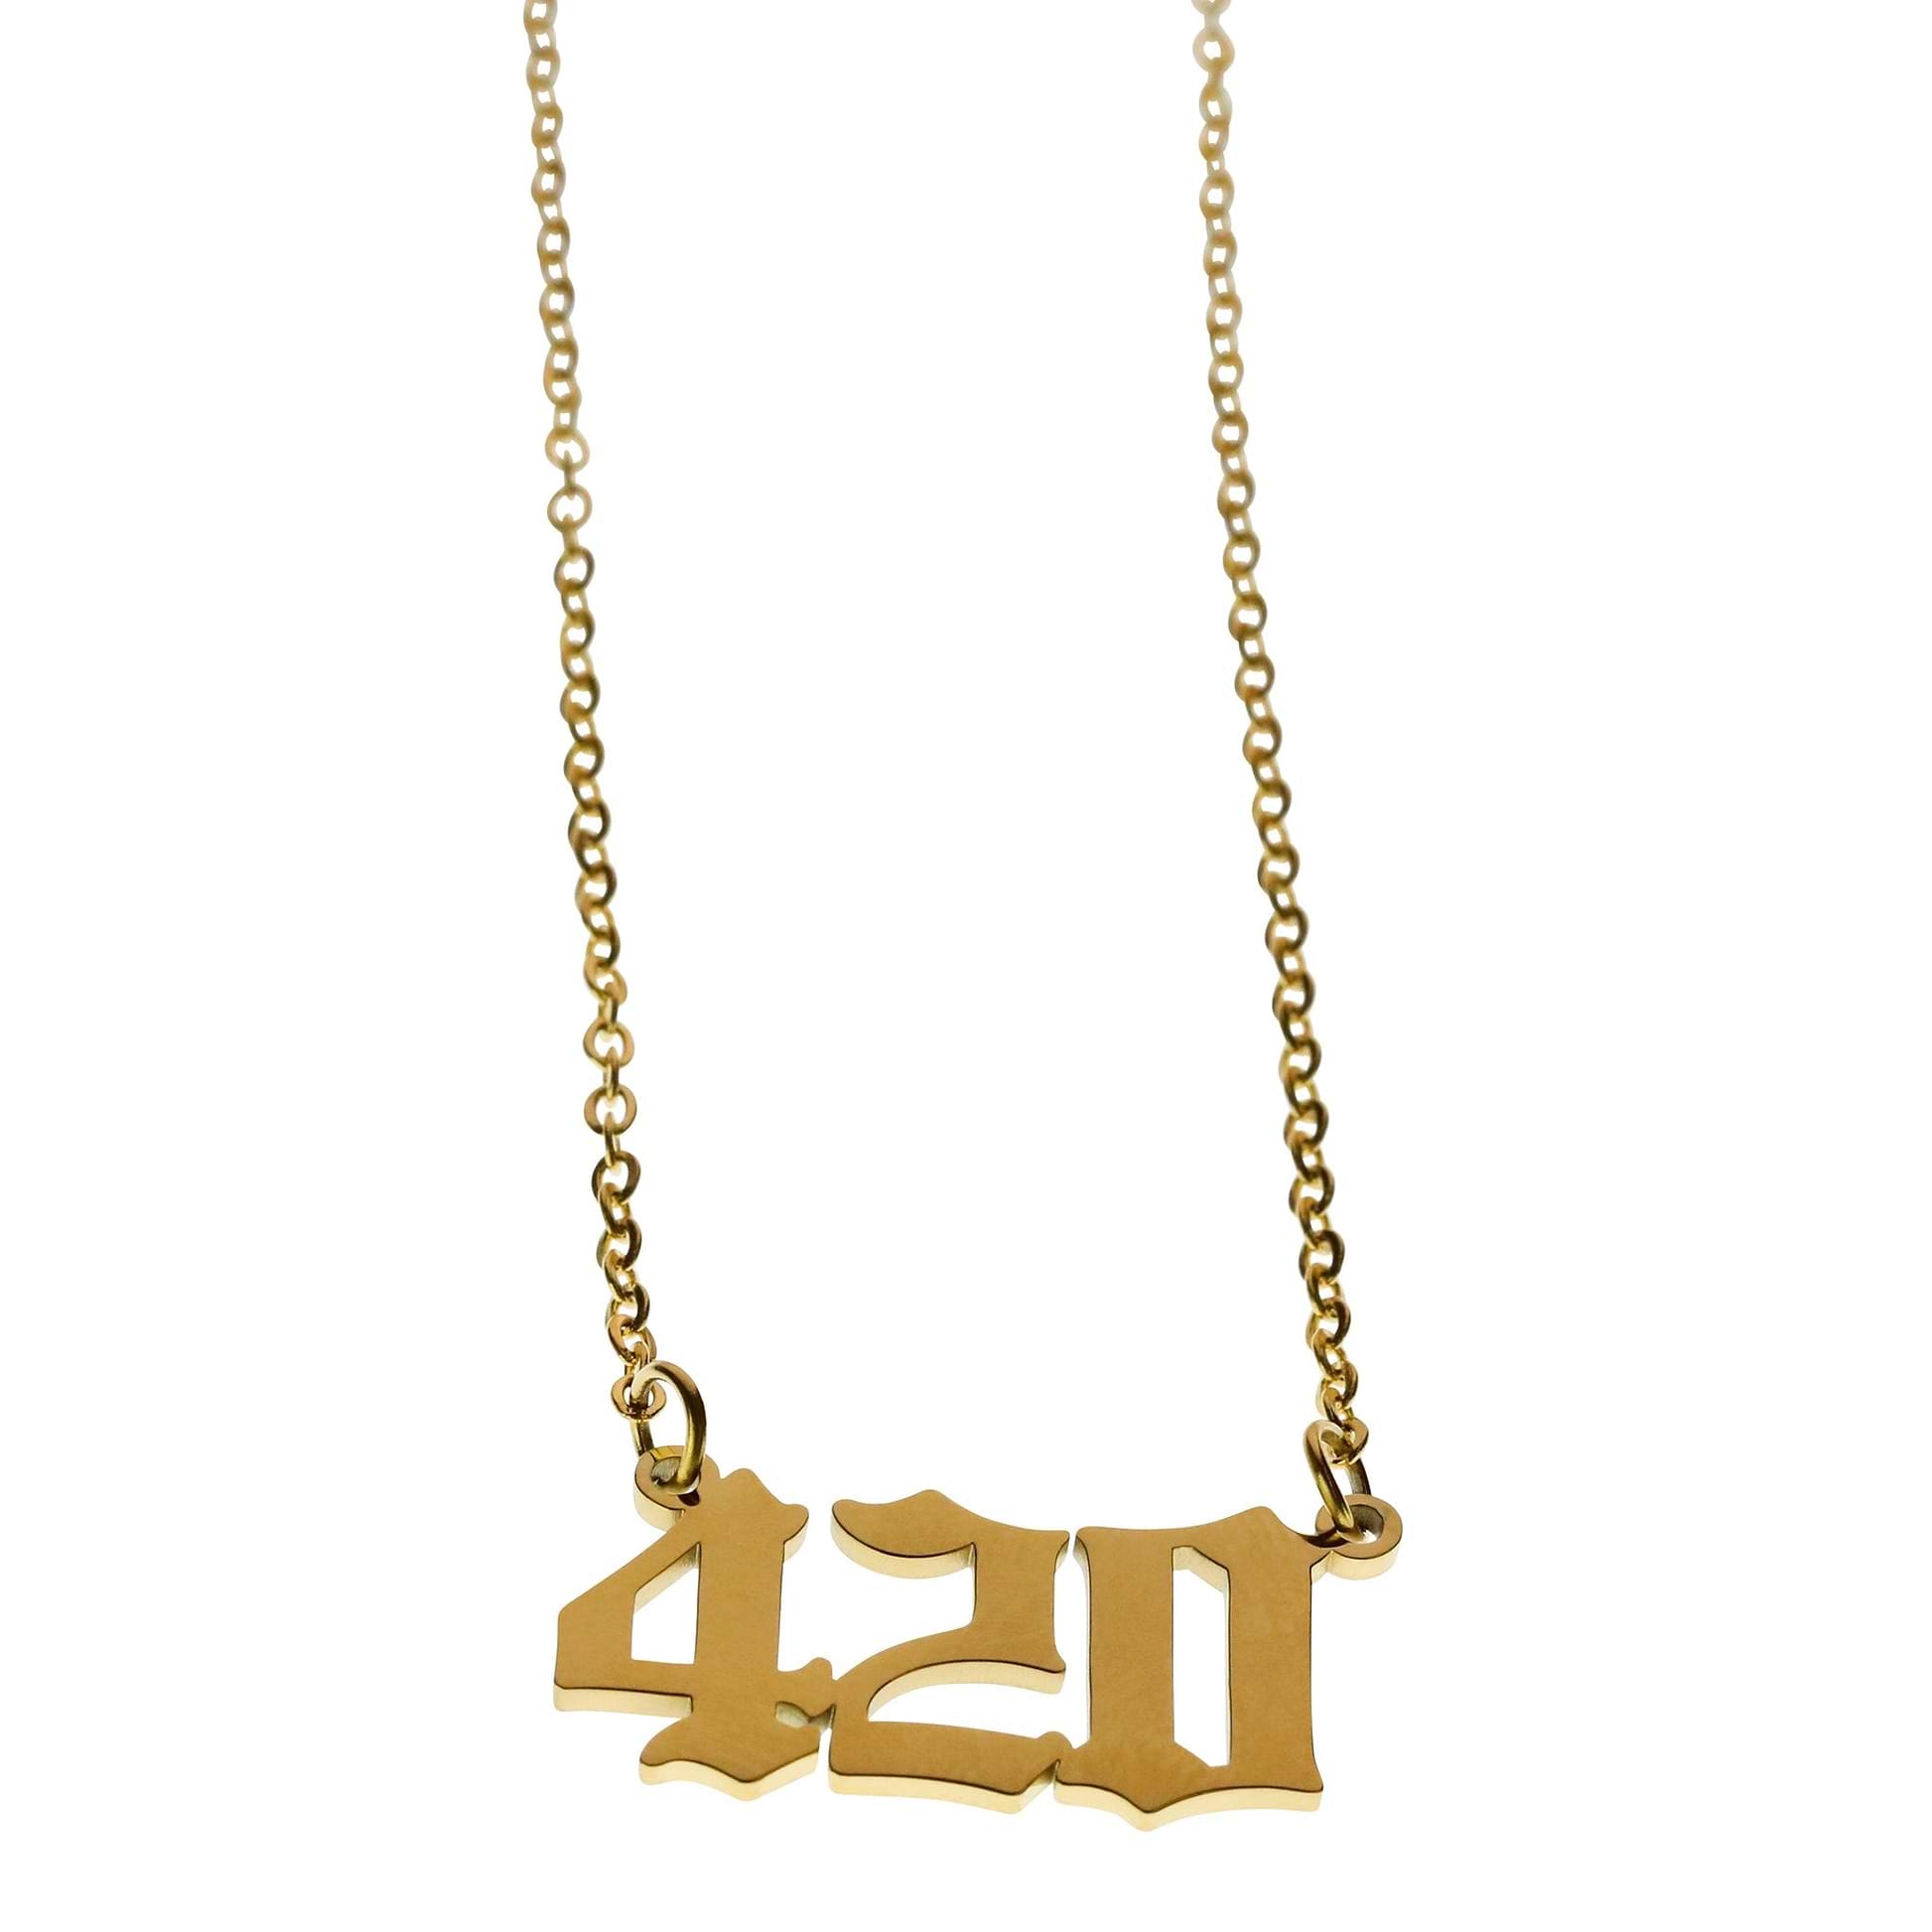 420 Necklace